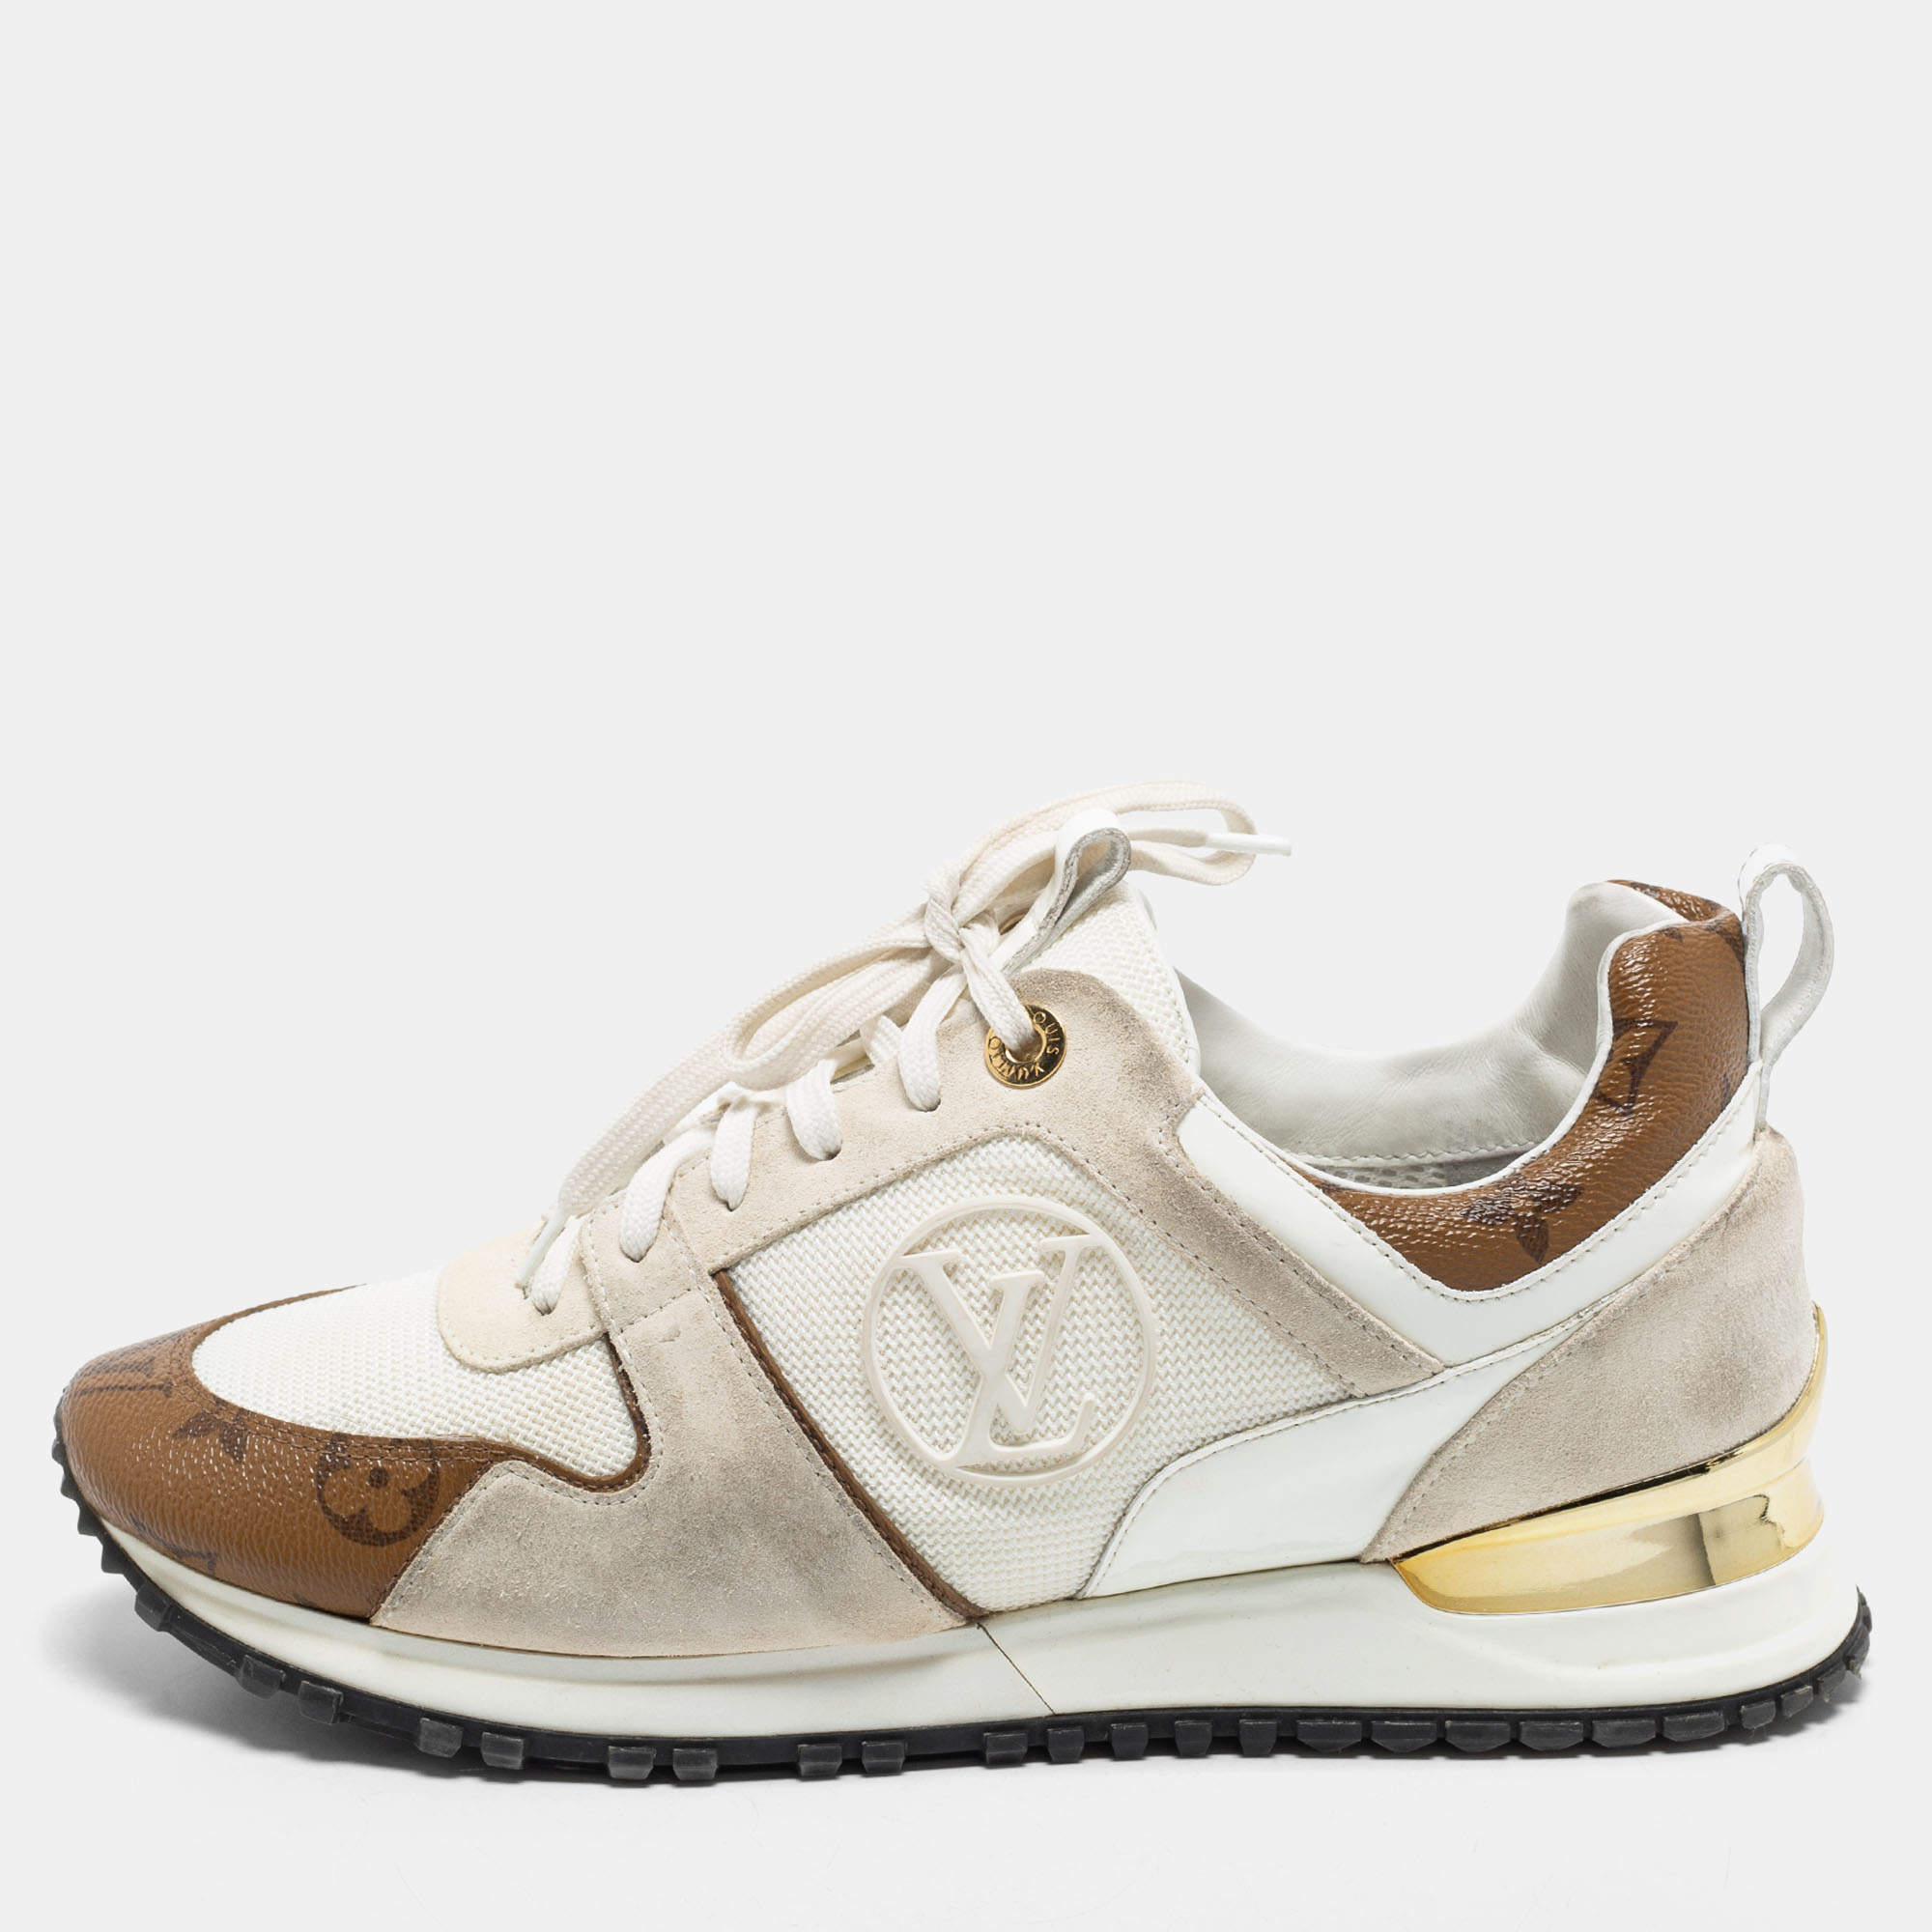 Louis Vuitton White Leather & Brown Monogram Coated Canvas Run Away  Sneakers - Size 39 EU / 9 US